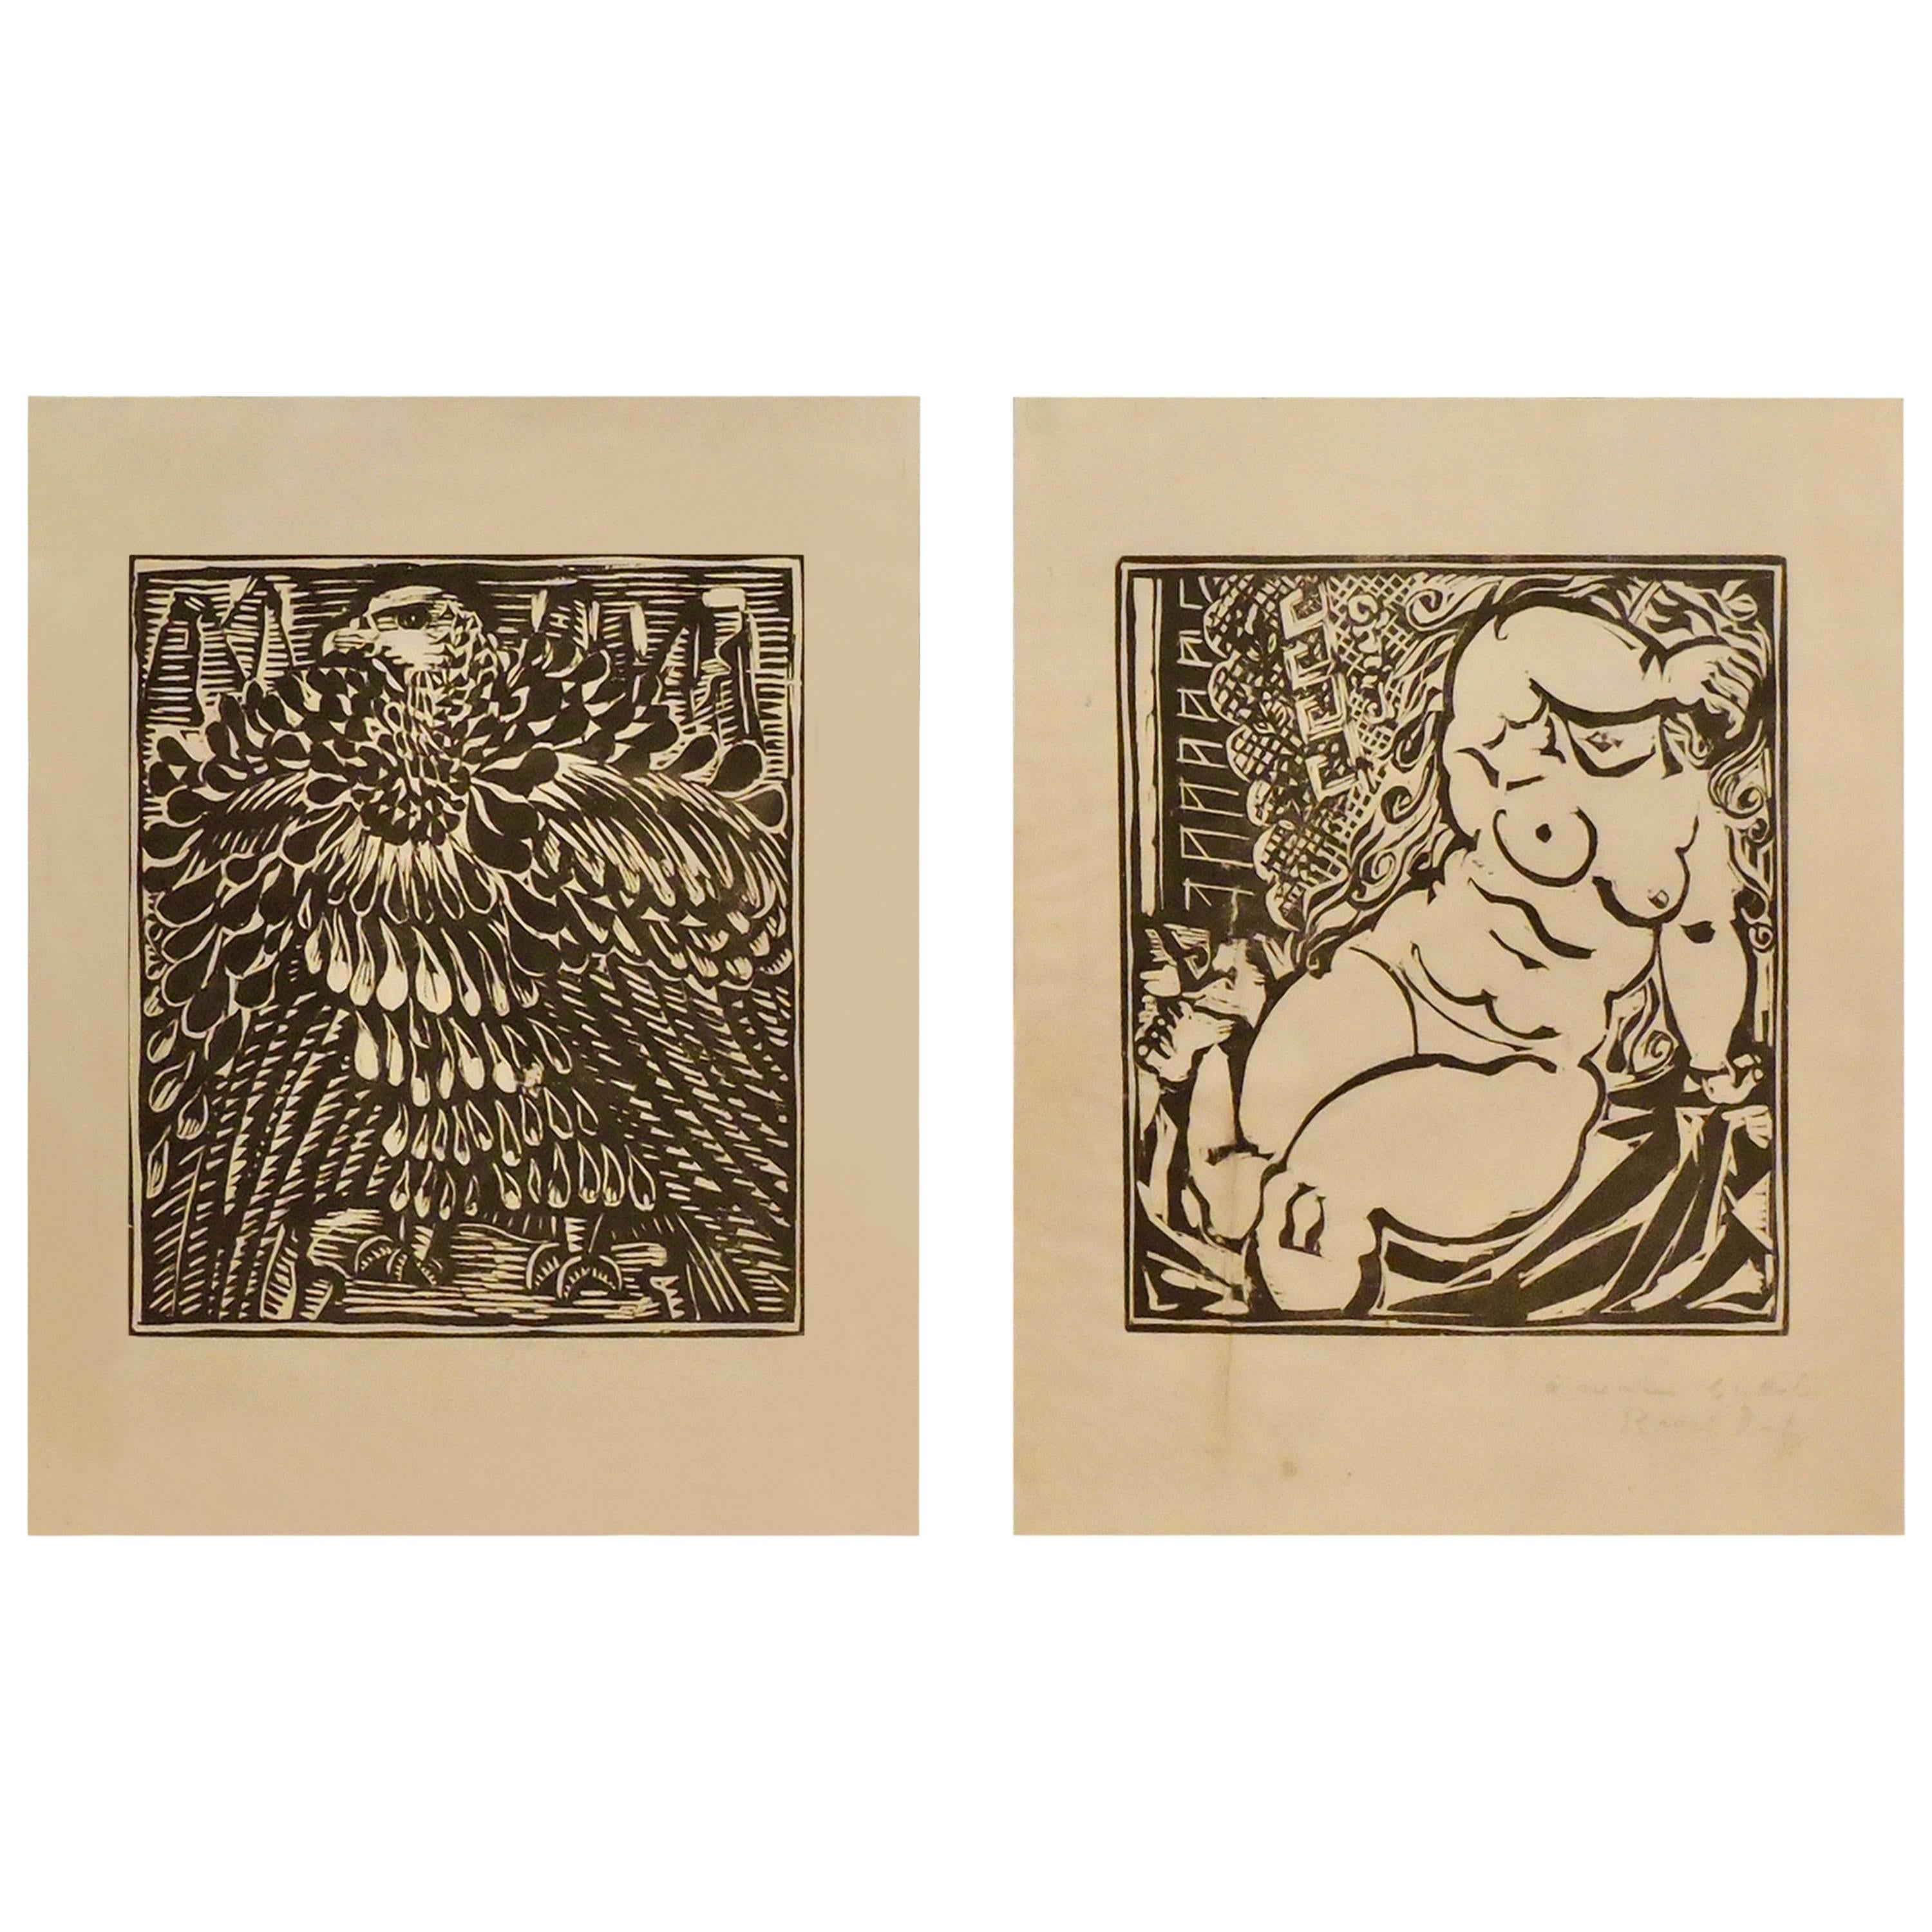 Pair of Framed Raoul Dufy Print-Multiple Woodcut, Chine Volant Paper